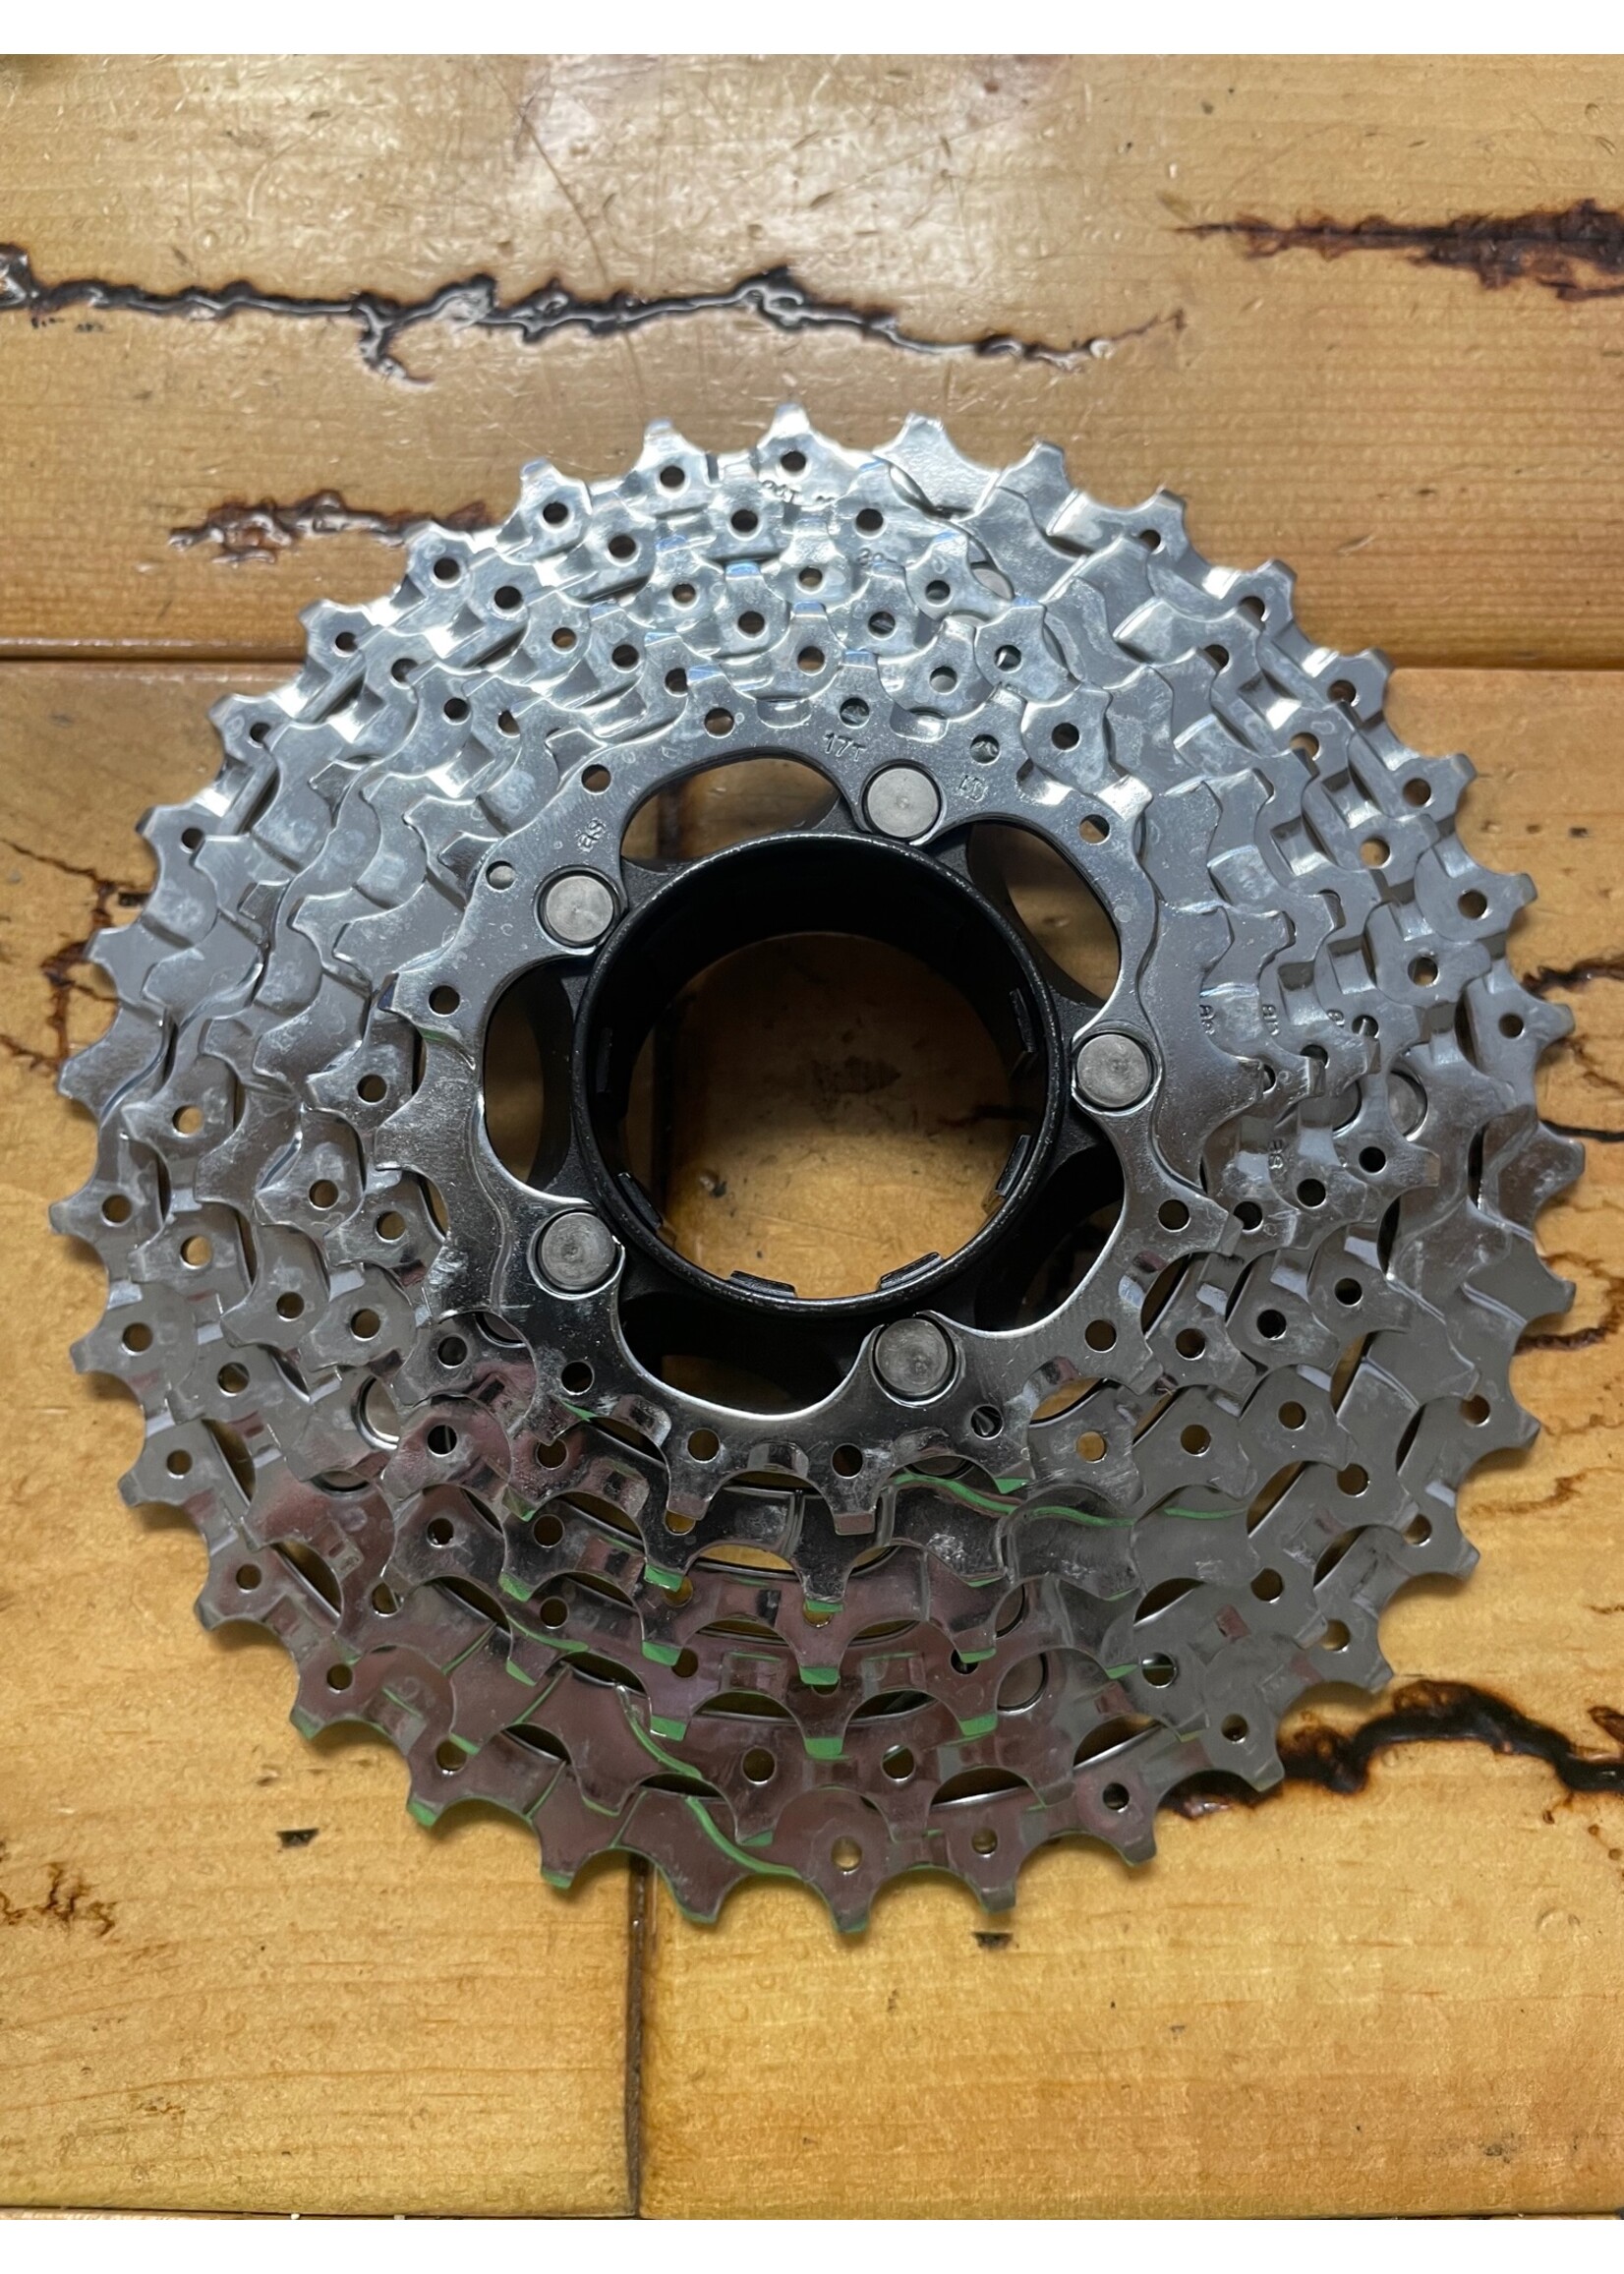 Shimano Deore XT CS-M750 11-34 9 Speed Cassette - Gringineer Cycles